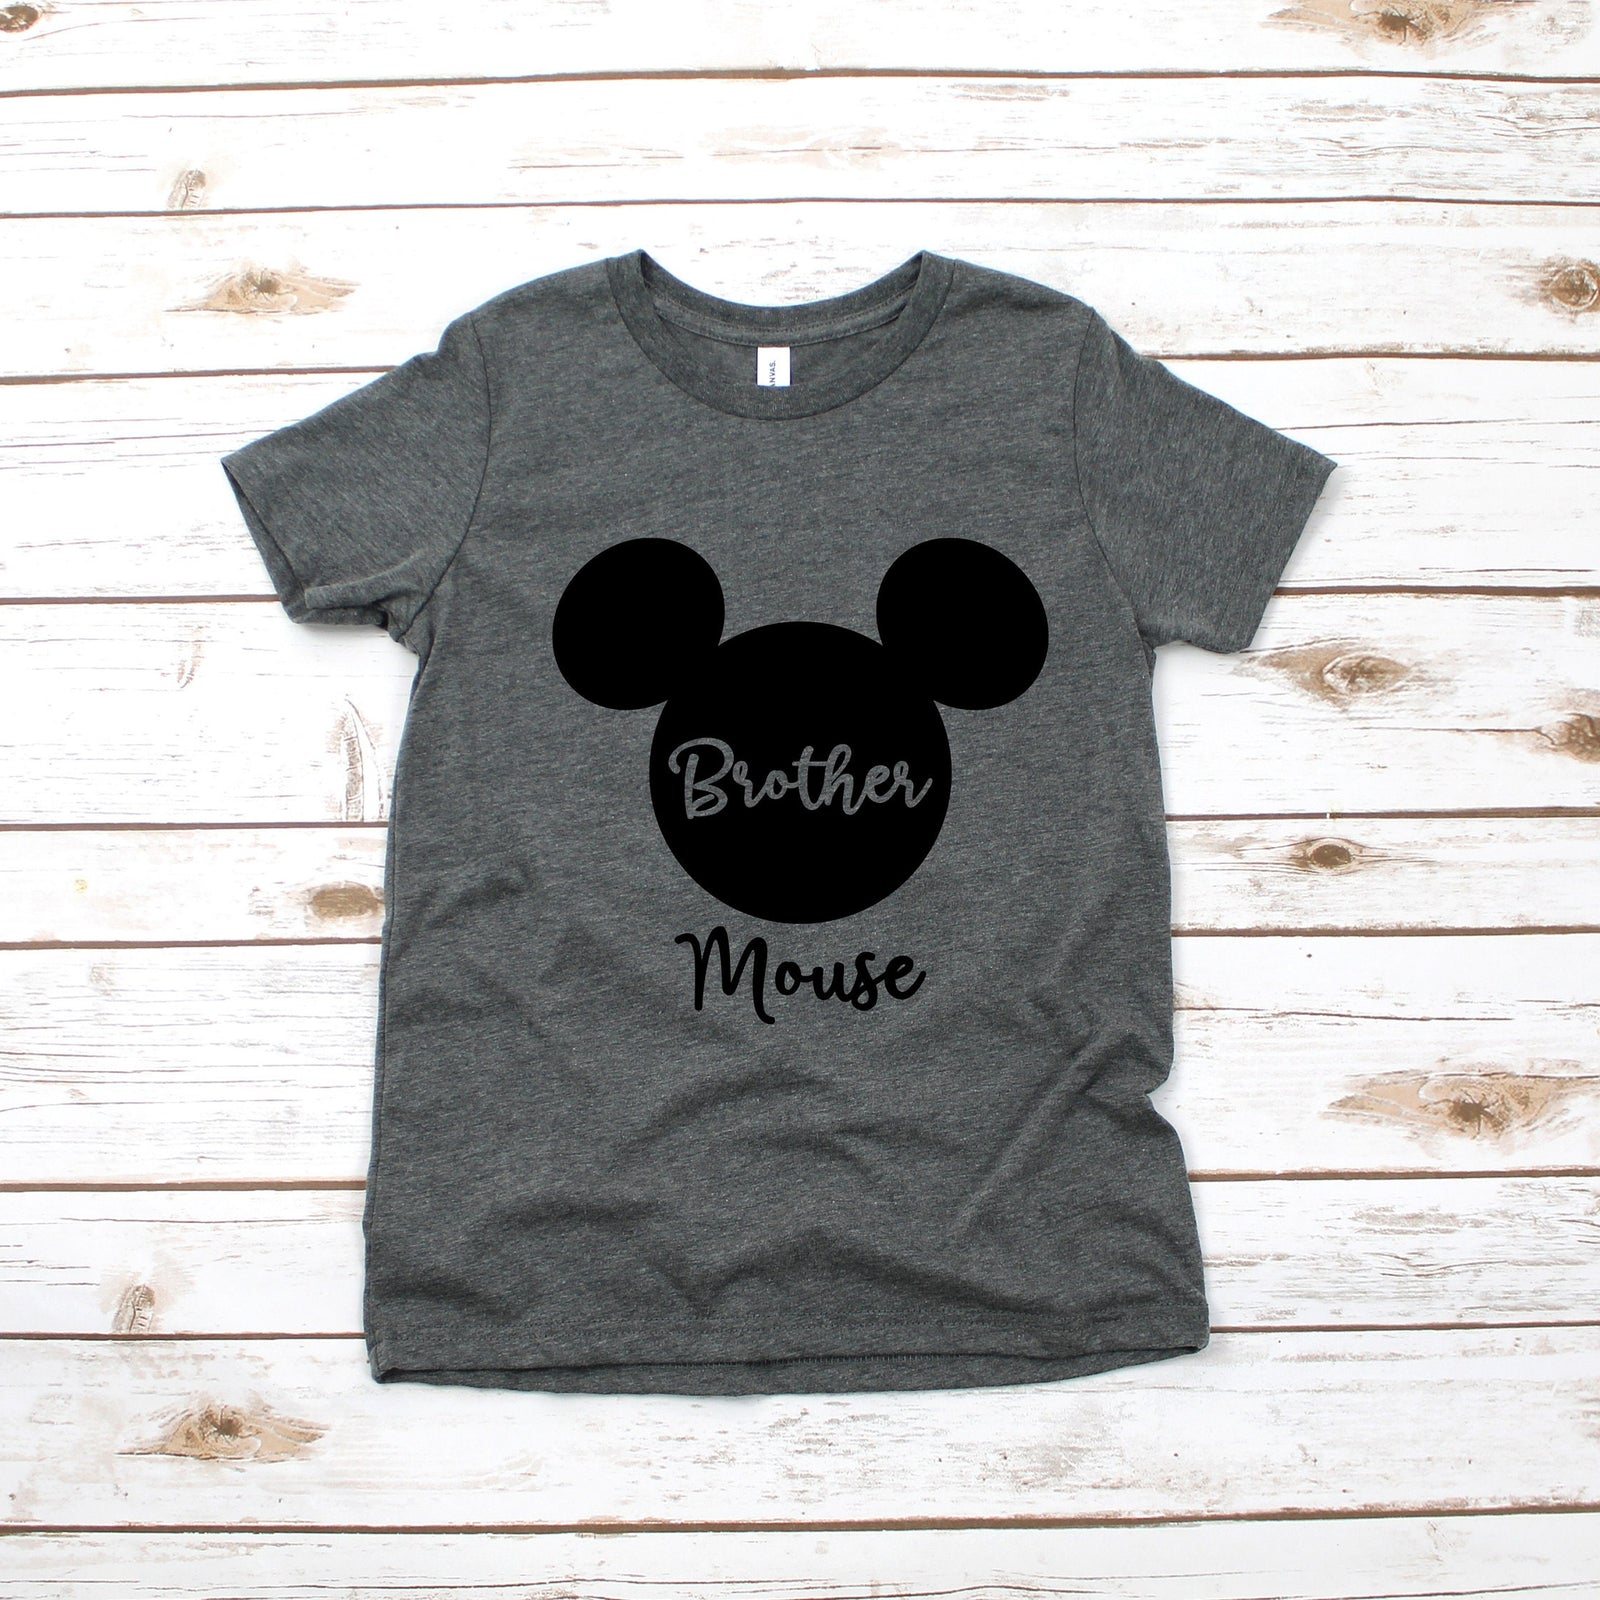 Brother Mouse Mickey Kids T Shirt - Infant Toddler Youth Mickey Shirt - Disney Kids Shirts - Family Matching